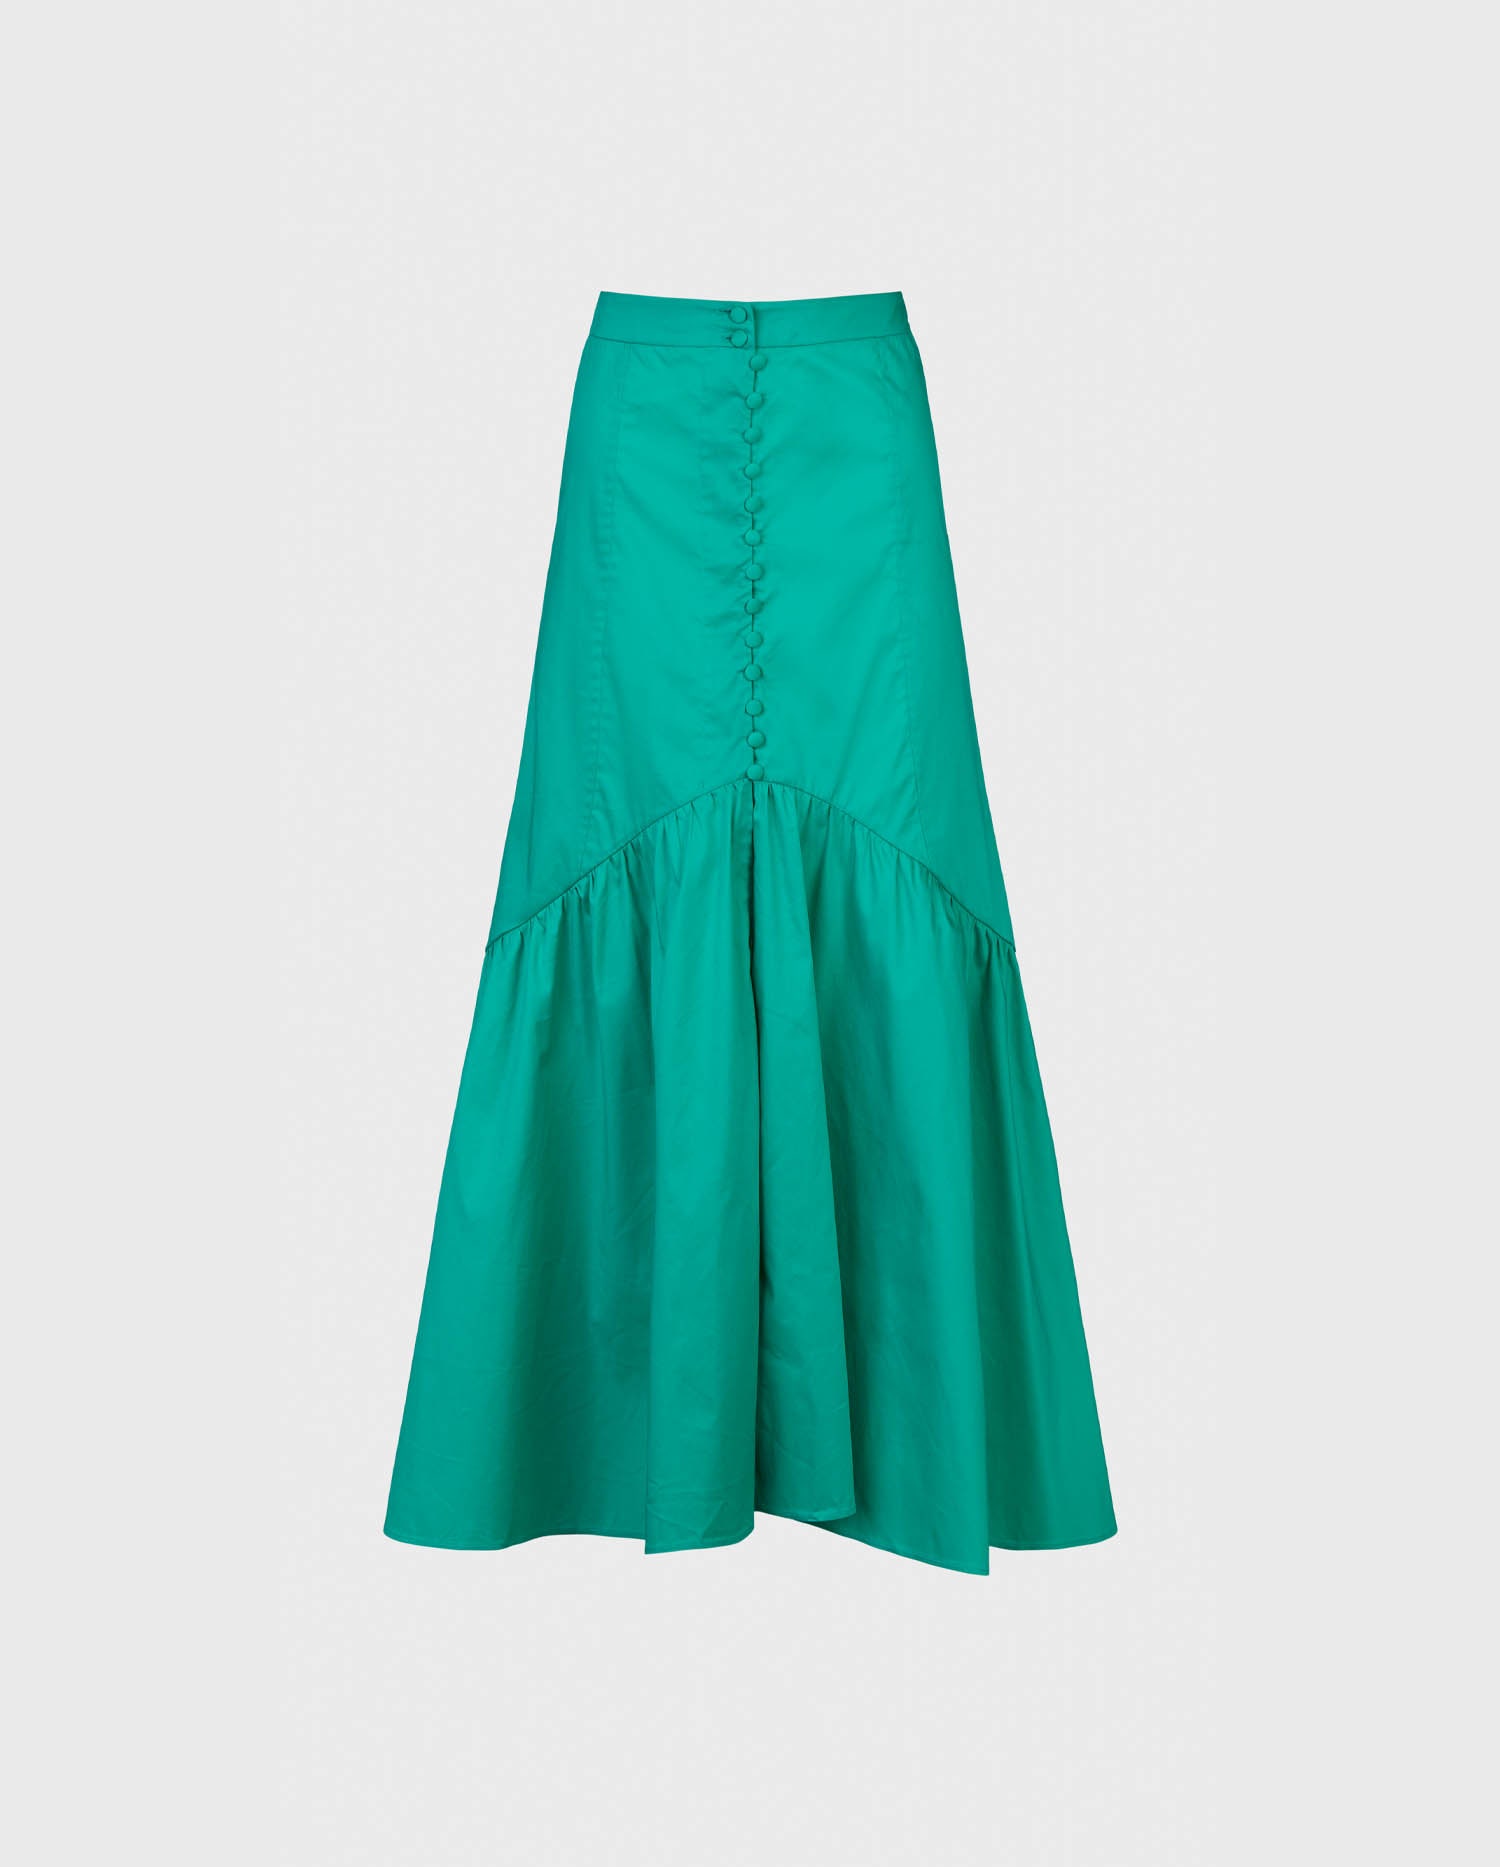 Discover The SURF Green Cotton Tiered Maxi Skirt From ANNE FONTAINE